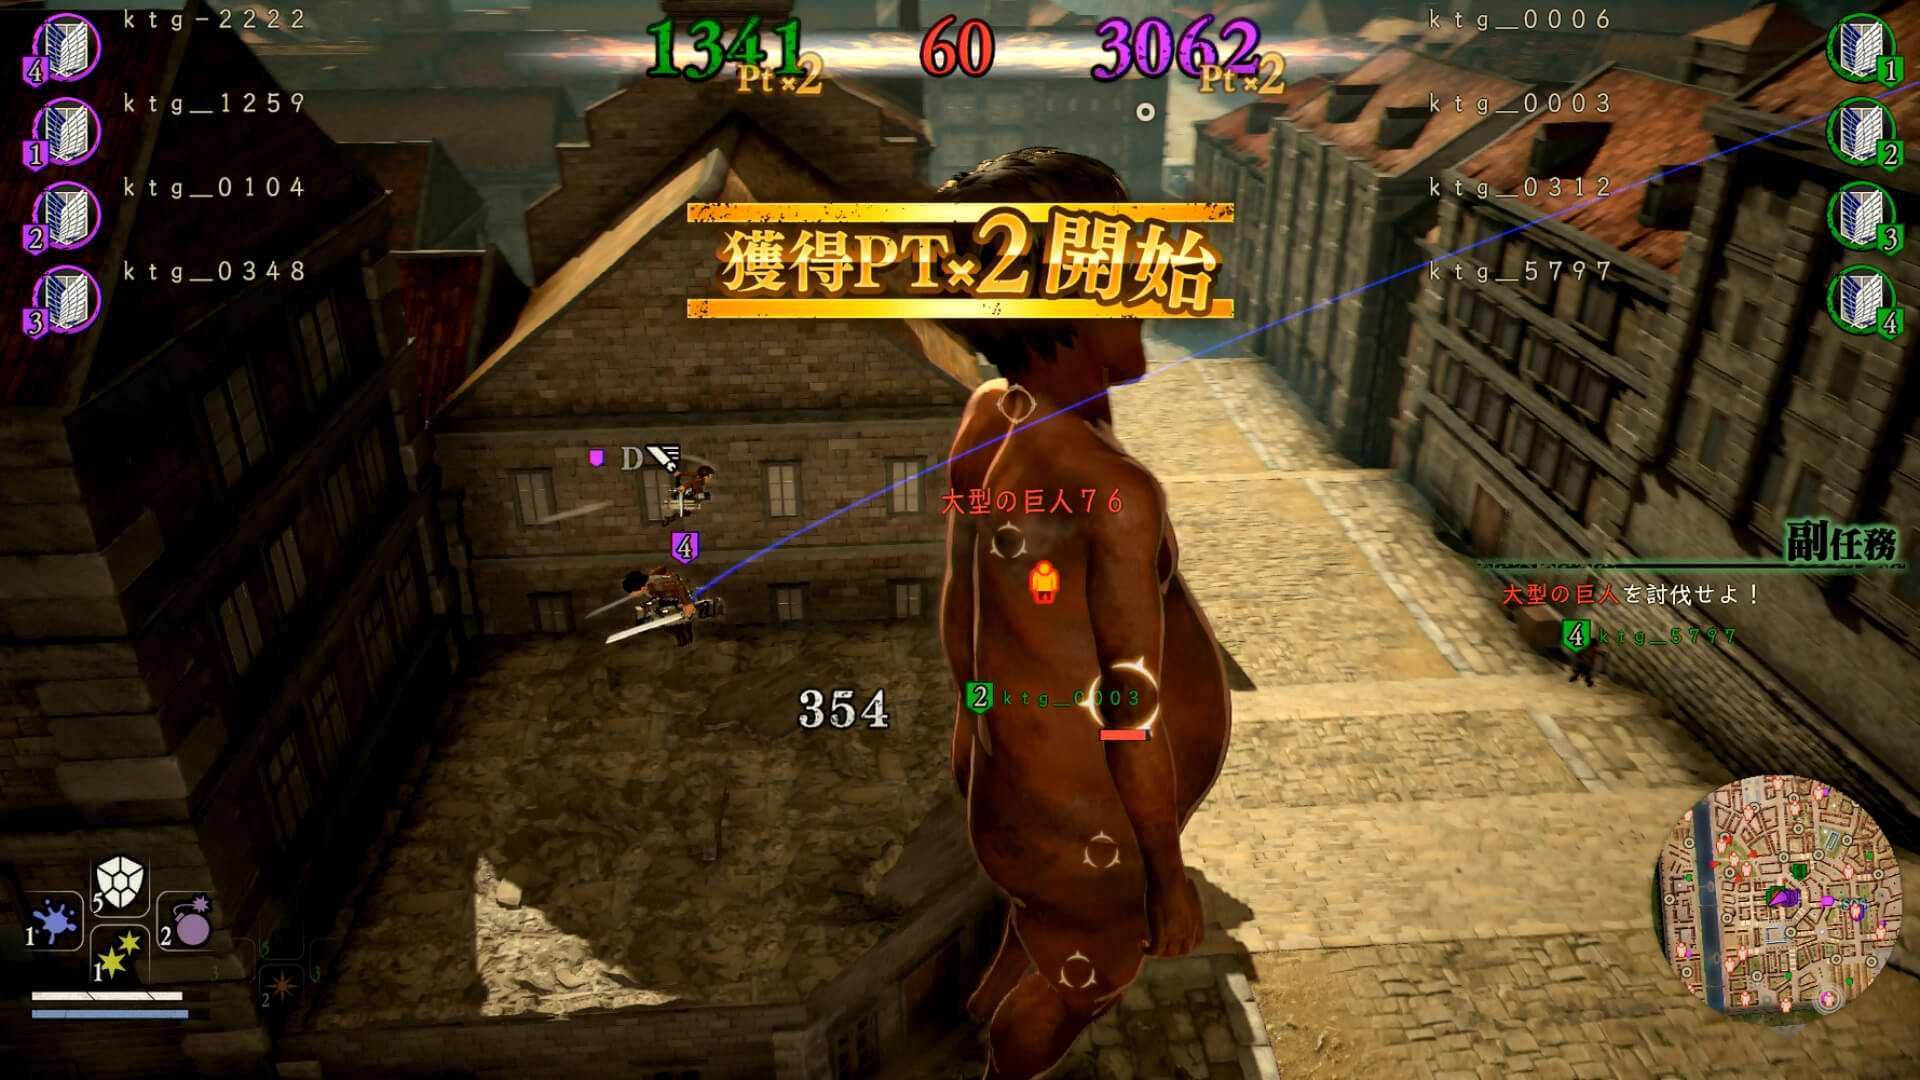 Attack on Titan 2 RPG Releases New Multiplayer Footage!, Game News